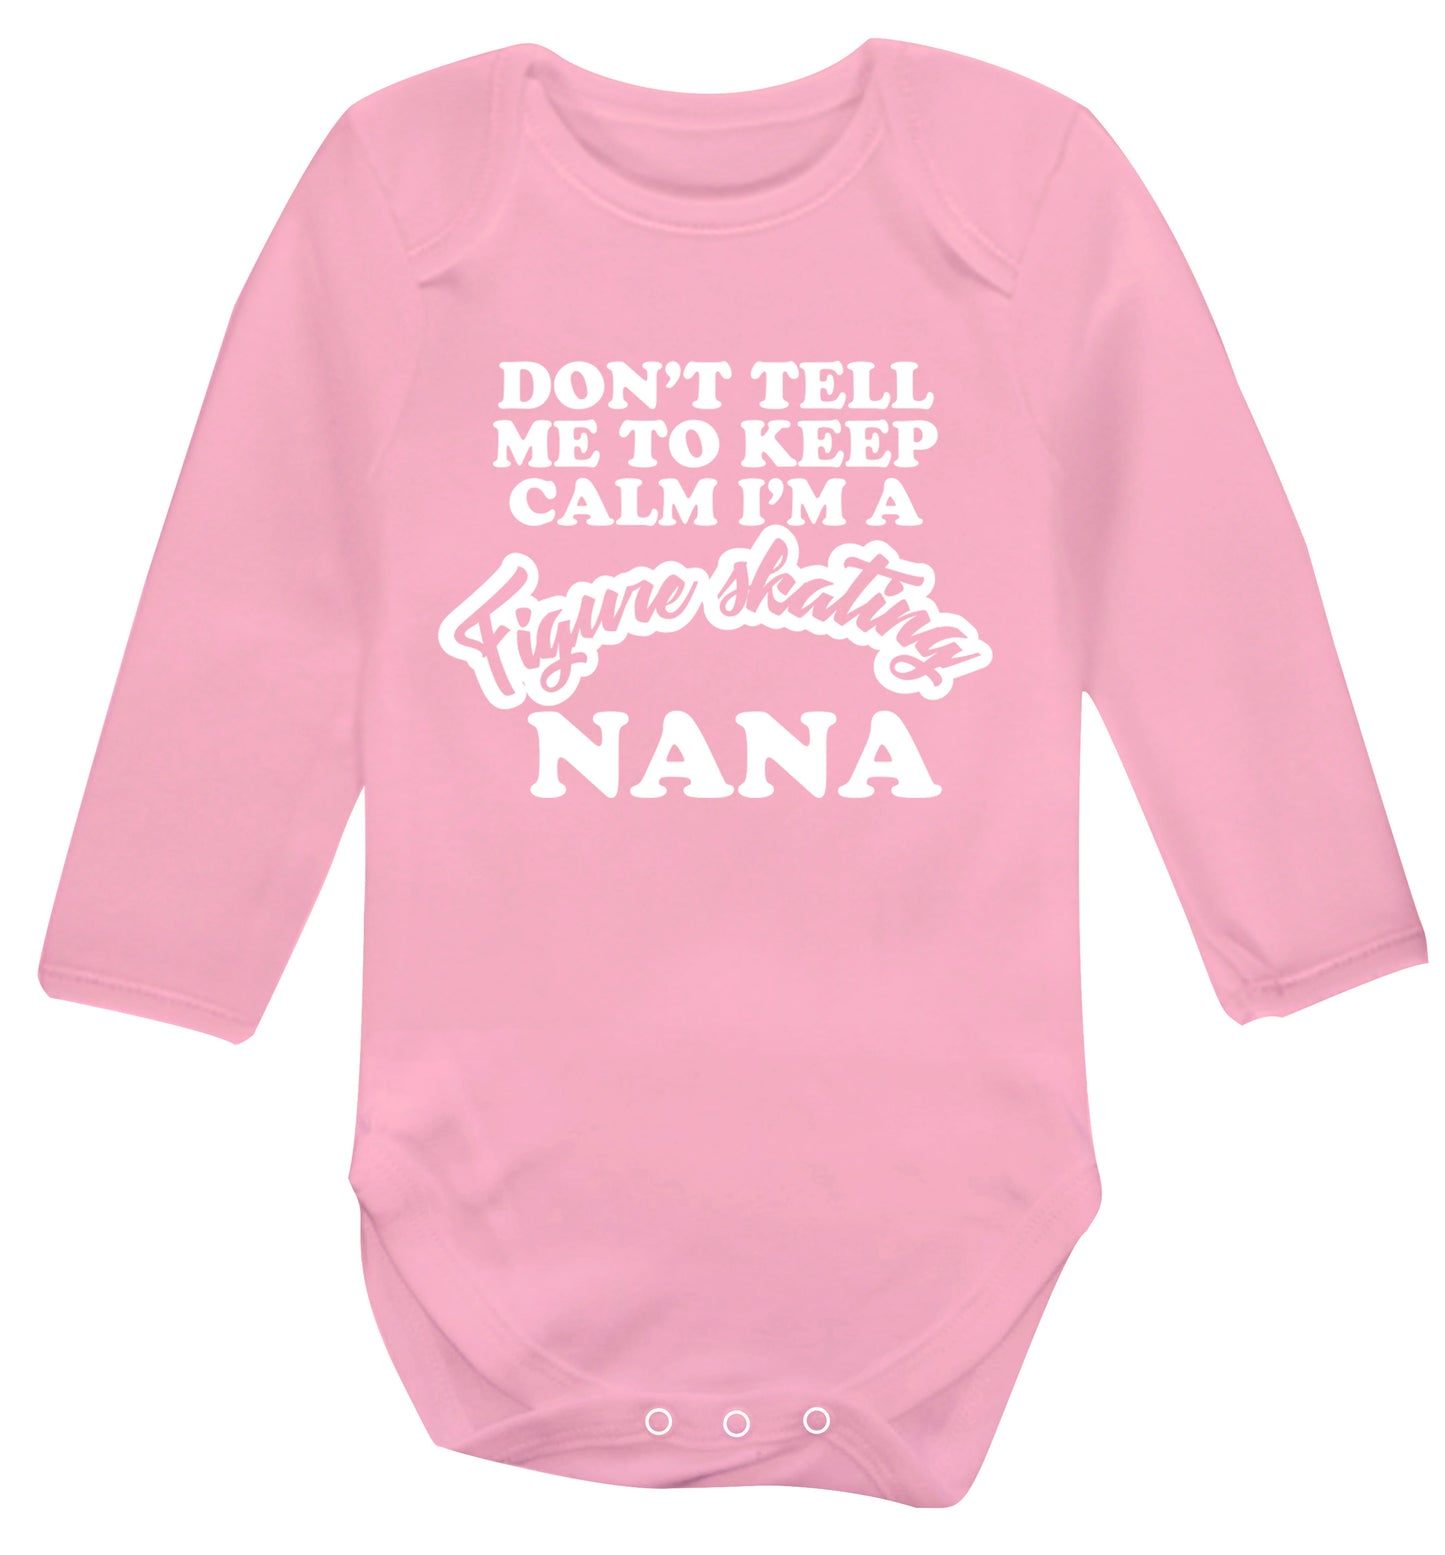 Don't tell me to keep calm I'm a figure skating nana Baby Vest long sleeved pale pink 6-12 months